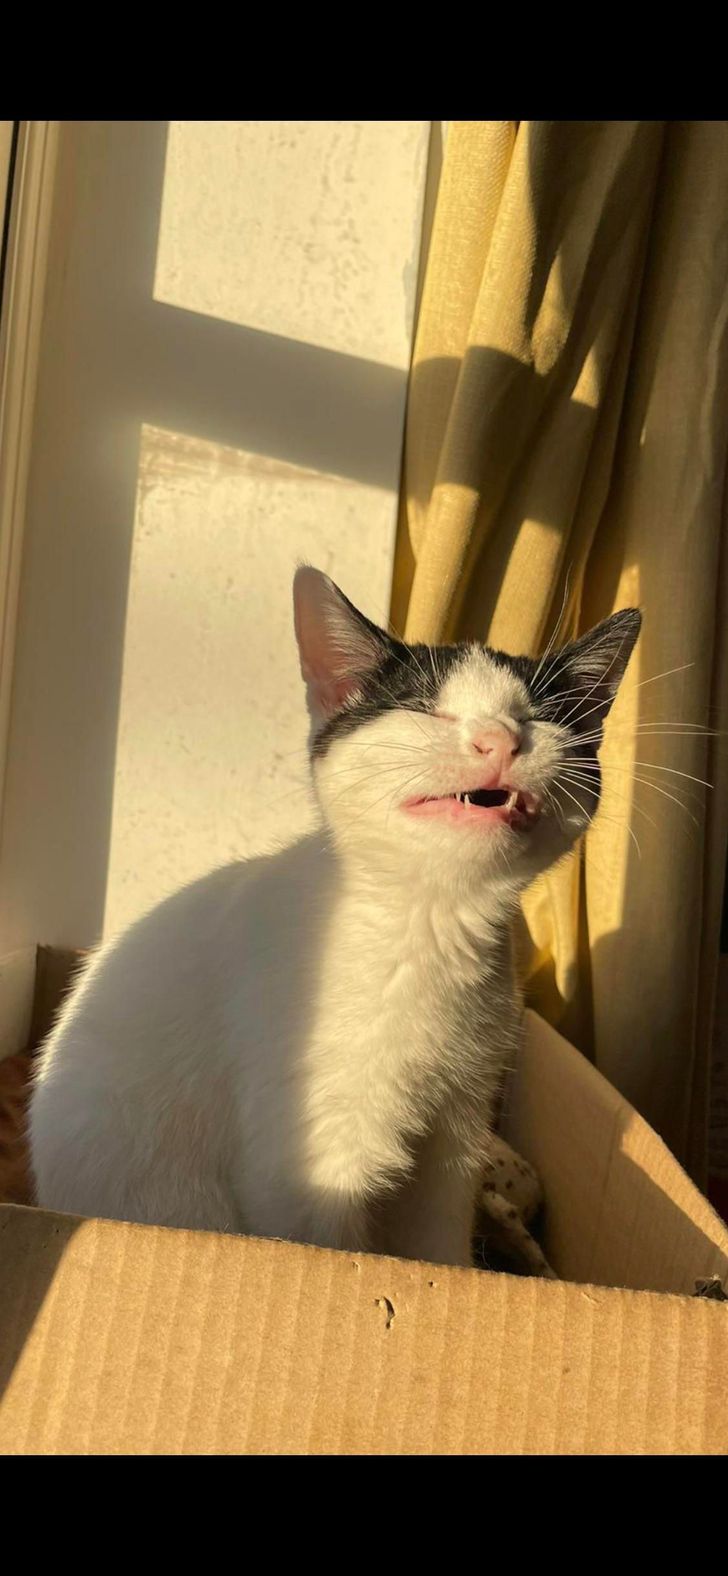 A cat right before sneezing